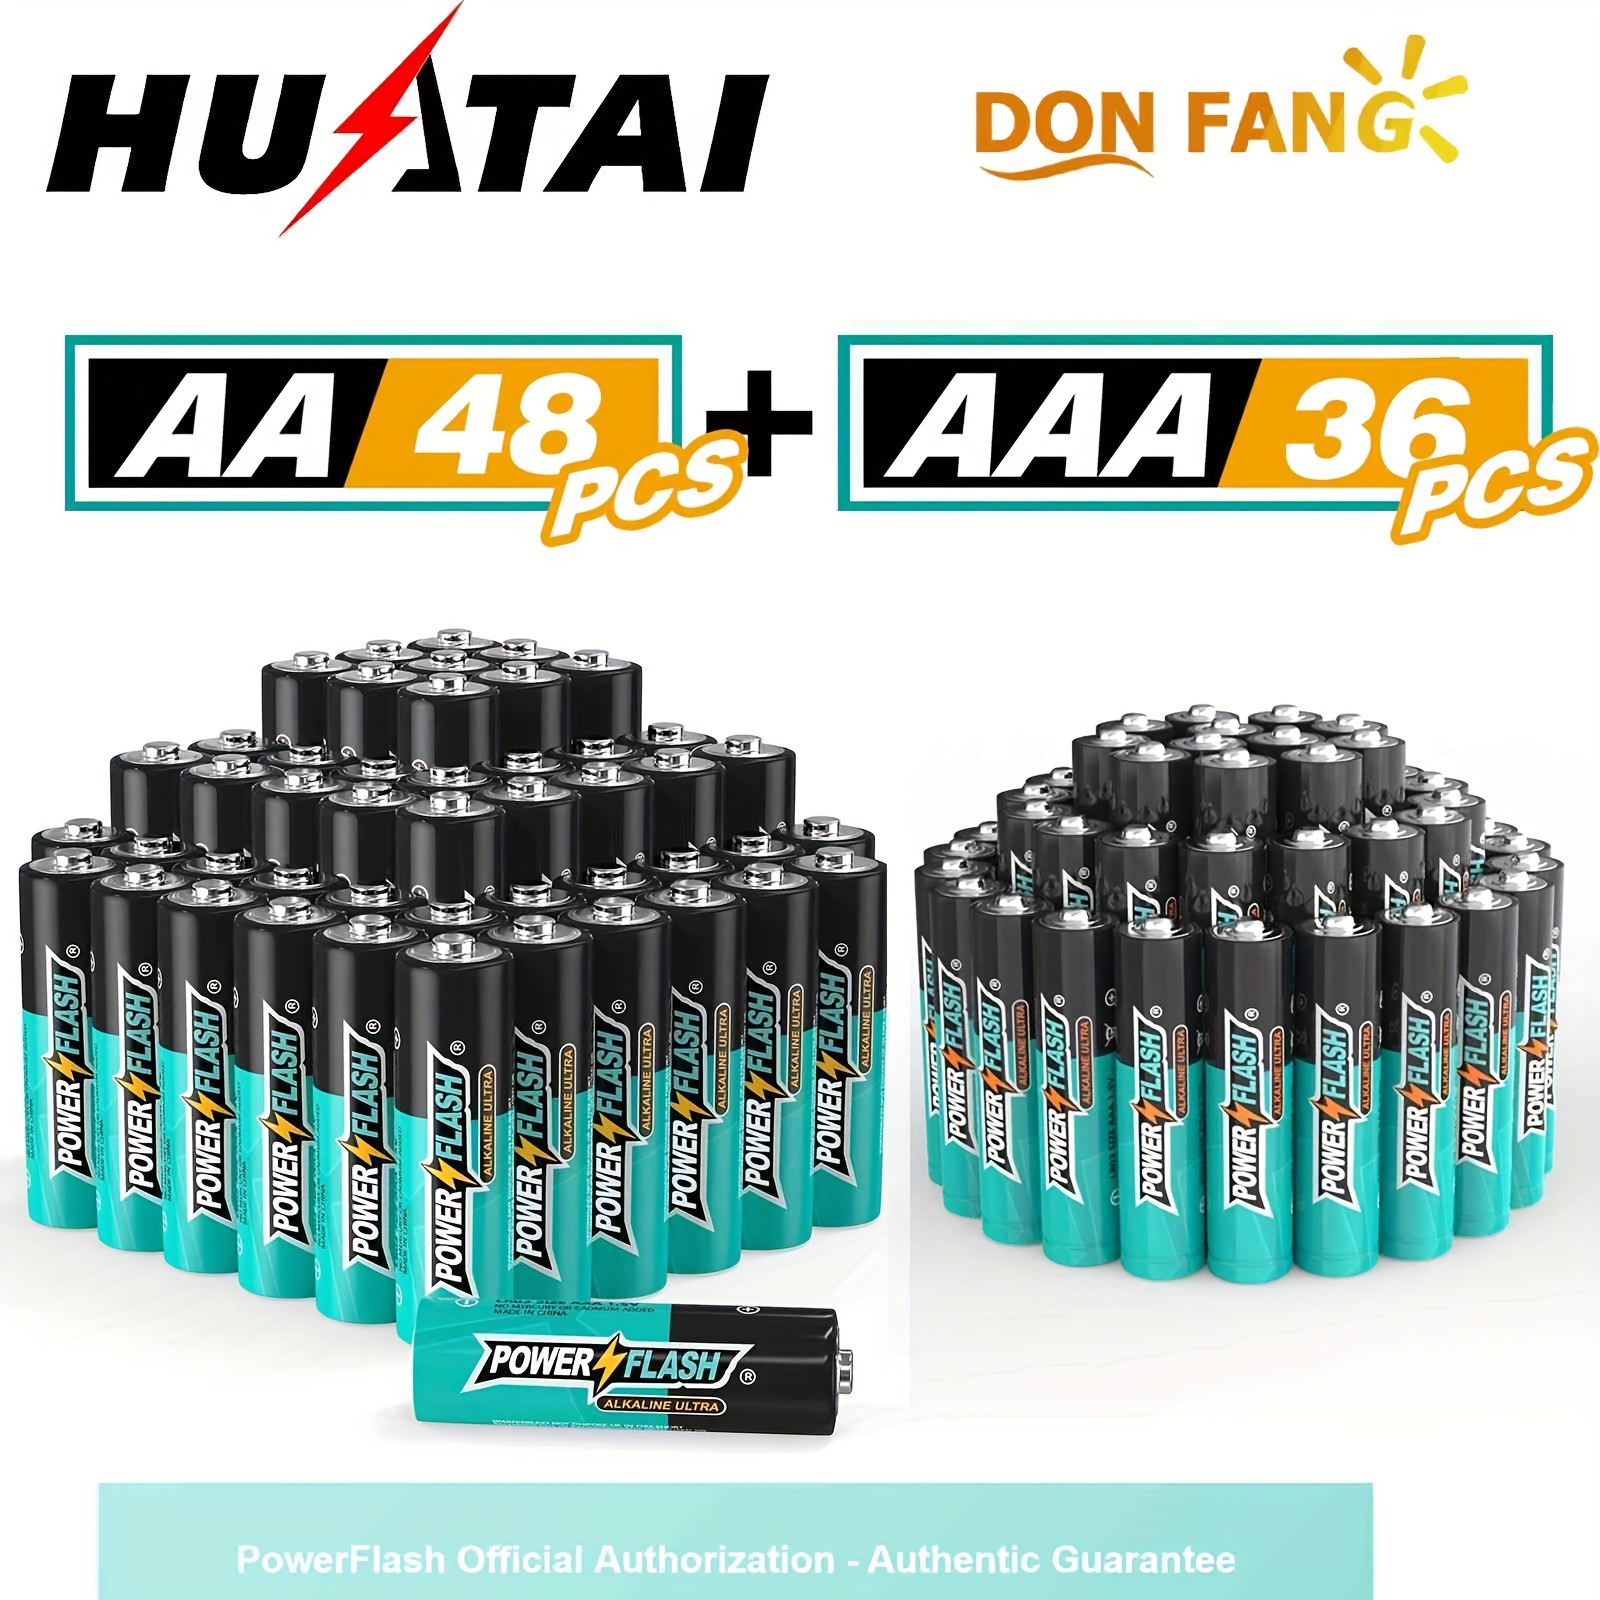 

Powerflash Alkaline Long-lasting Batteries, Combo Pack, Set Of 36 Pcs Aaa And 48 Pcs Aa Batteries For Home, Various Household Device, Work